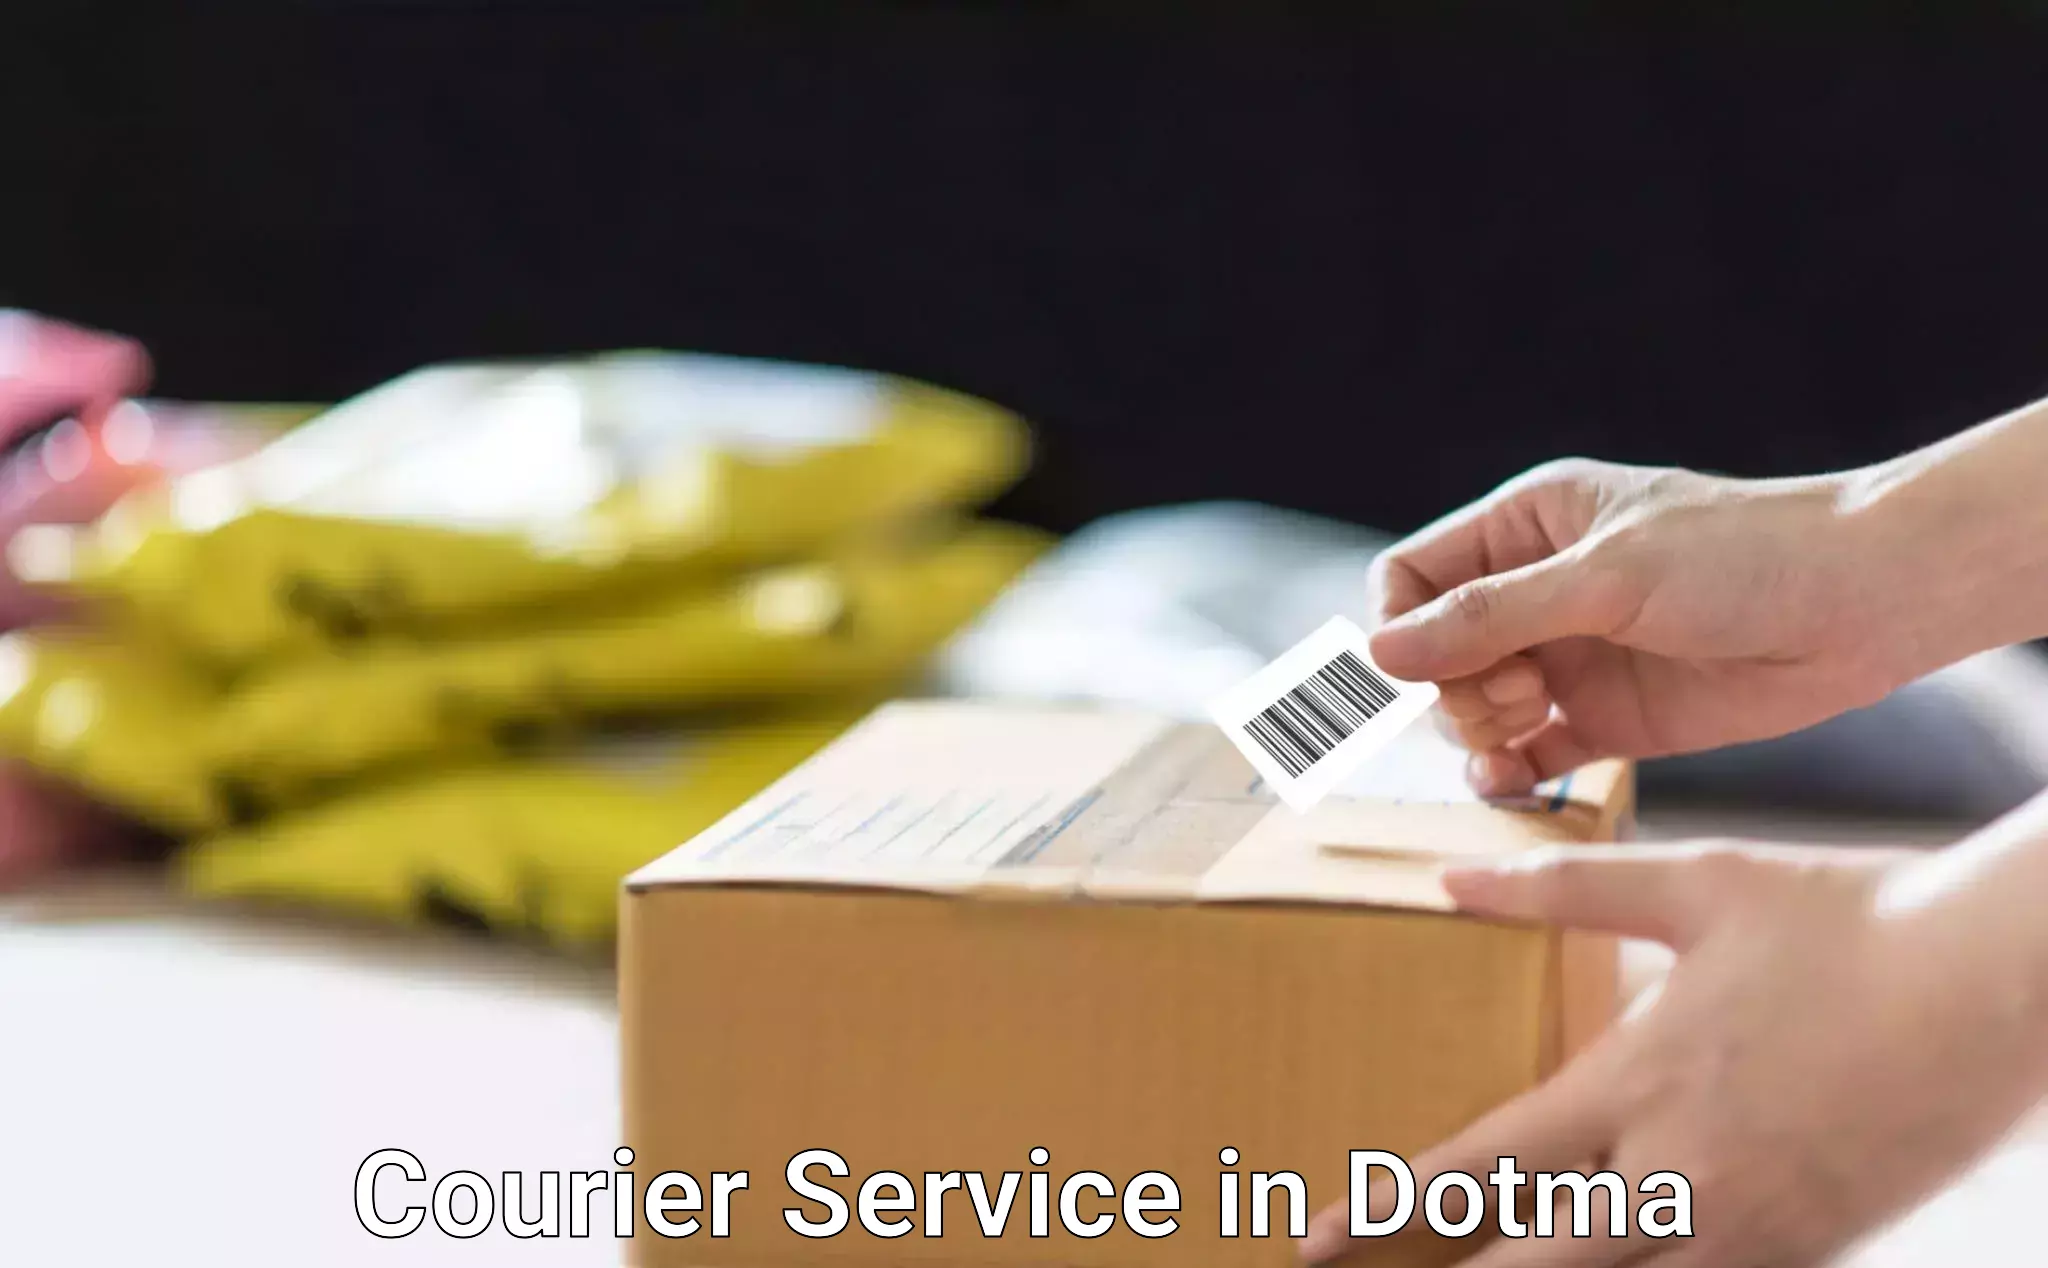 State-of-the-art courier technology in Dotma